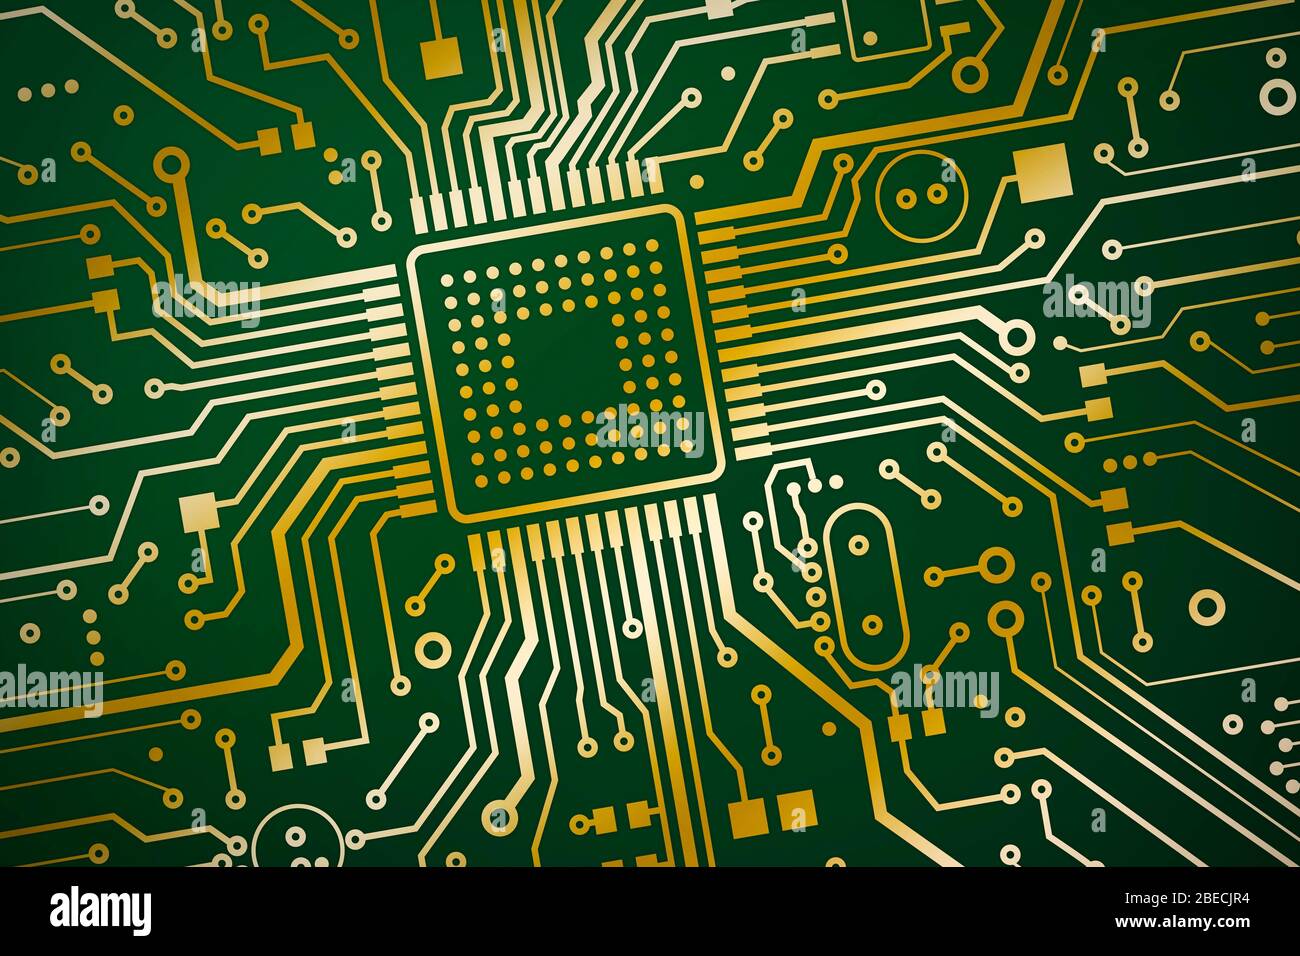 Information technologies. Microchip on circuit board, top view. Illustration Stock Photo